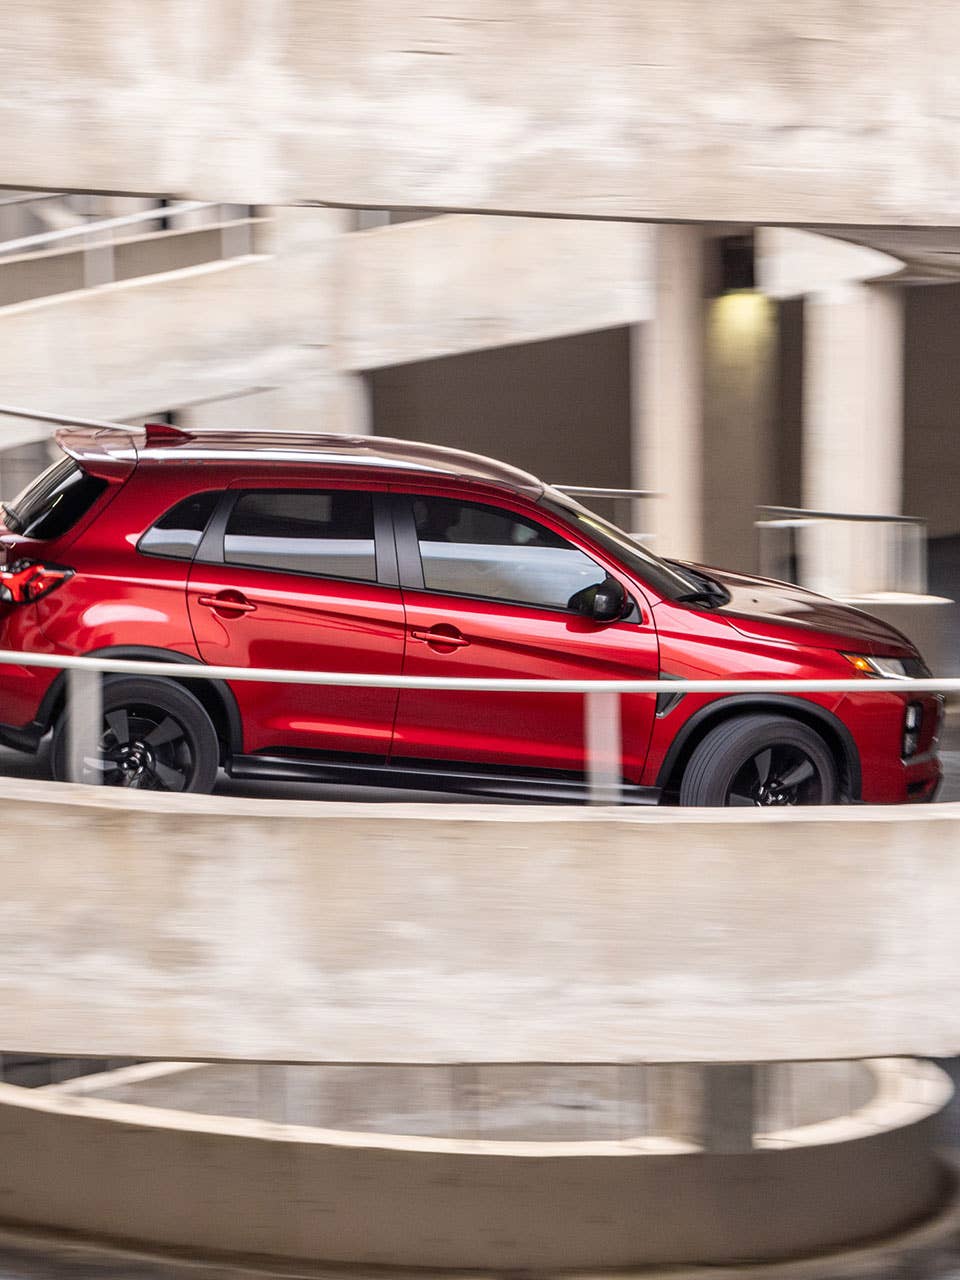 https://www.mitsubishicars.com/content/dam/mitsubishi-motors-us/images/siteimages/cars/outlander-sport/my24/overview/2024-mitsubishi-outlander-sport-suv-red-ramp-m.jpg?width=960&auto=webp&quality=70